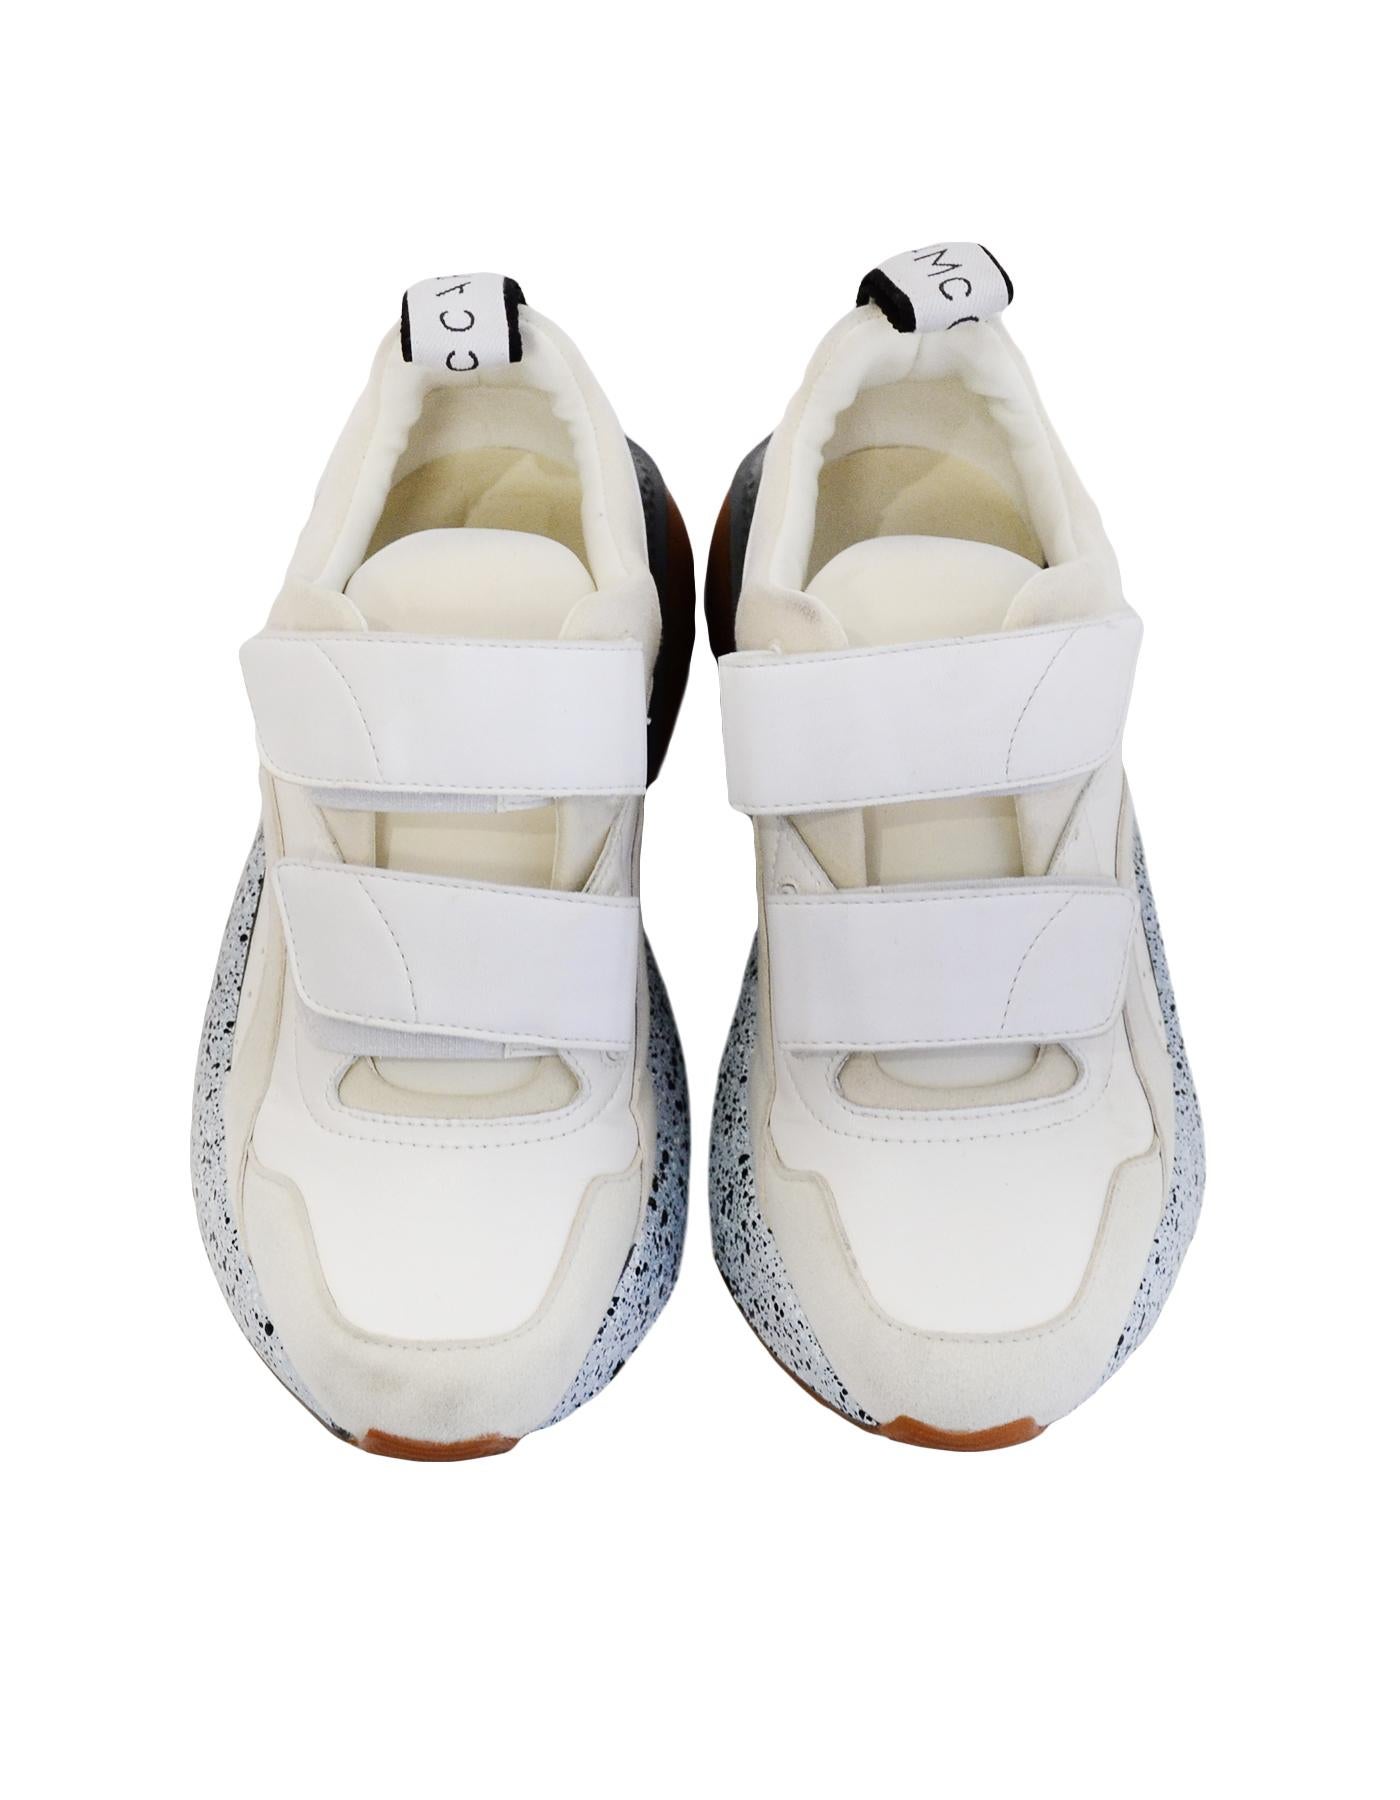 Women's Stella McCartney White/Cream Faux Leather Runway Lace-Up Sneakers sz 37 rt $640